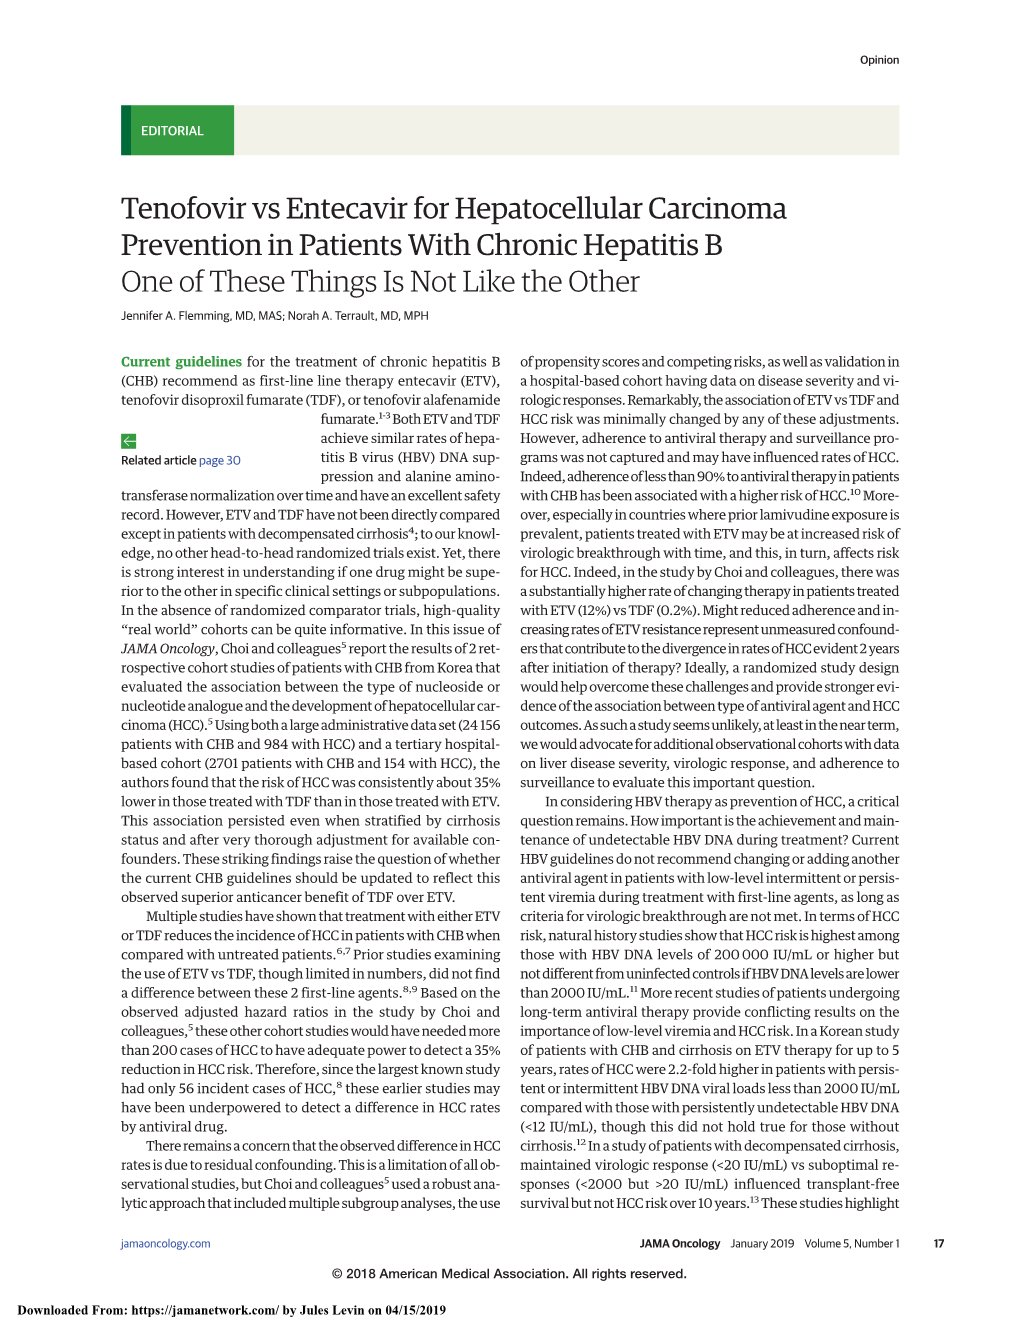 Tenofovir Vs Entecavir for Hepatocellular Carcinoma Prevention in Patients with Chronic Hepatitis B One of These Things Is Not Like the Other Jennifer A